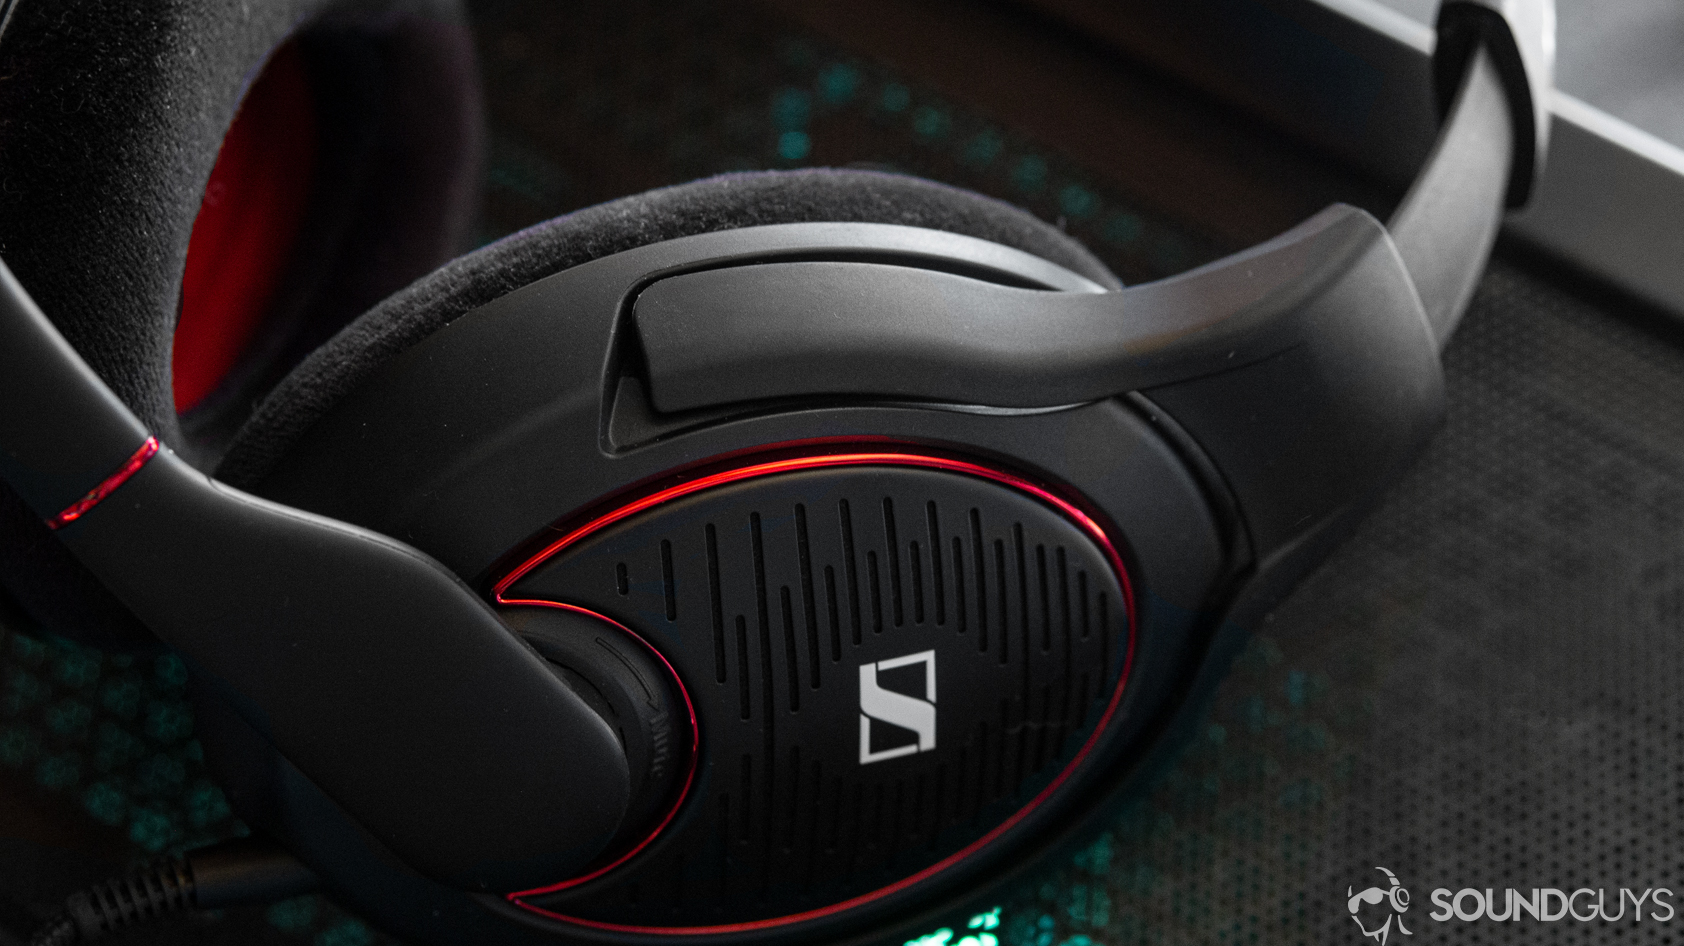 A photo of the Sennheiser Game One headset on a computer.